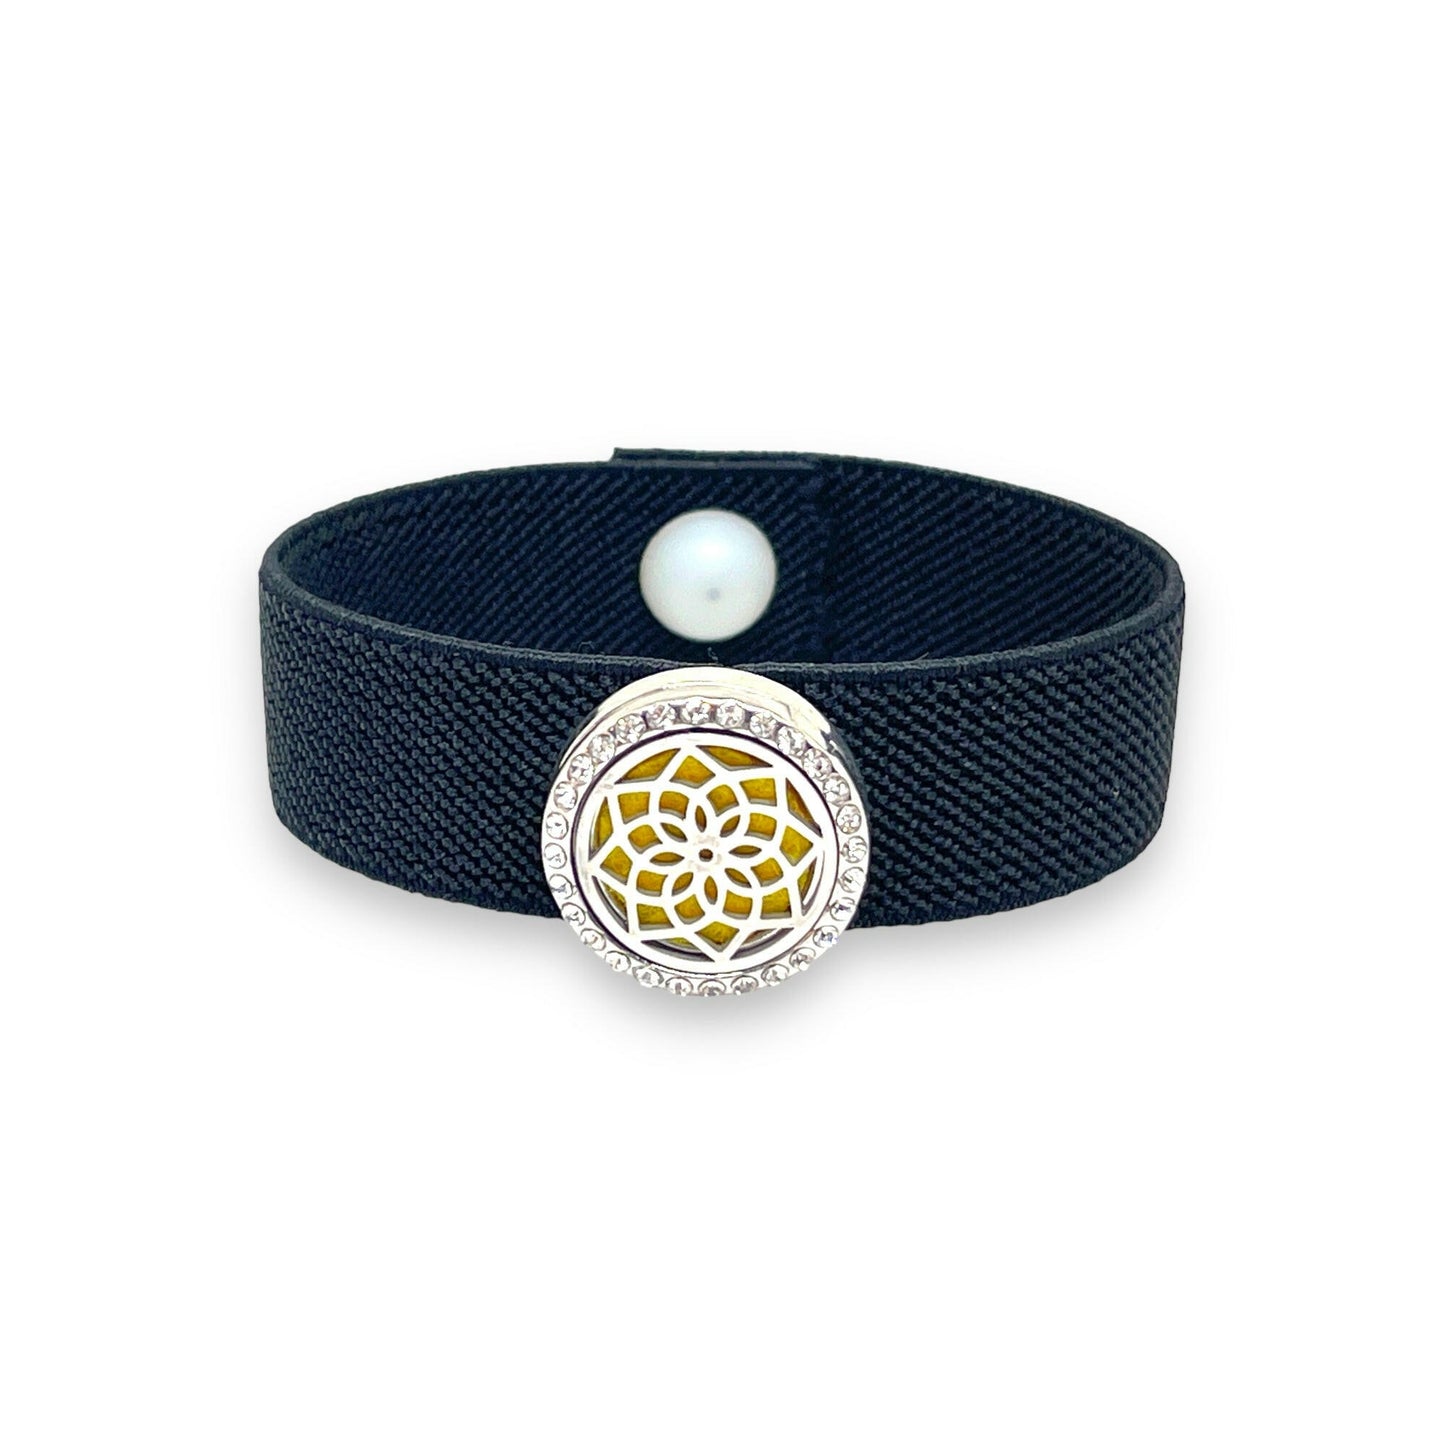 Anxiety Relief Snap Button Diffuser Bracelet-Scented-Reduces Stress, Vertigo-Acupressure Band-Mood Support-Balance-Snap Locket Diffuser